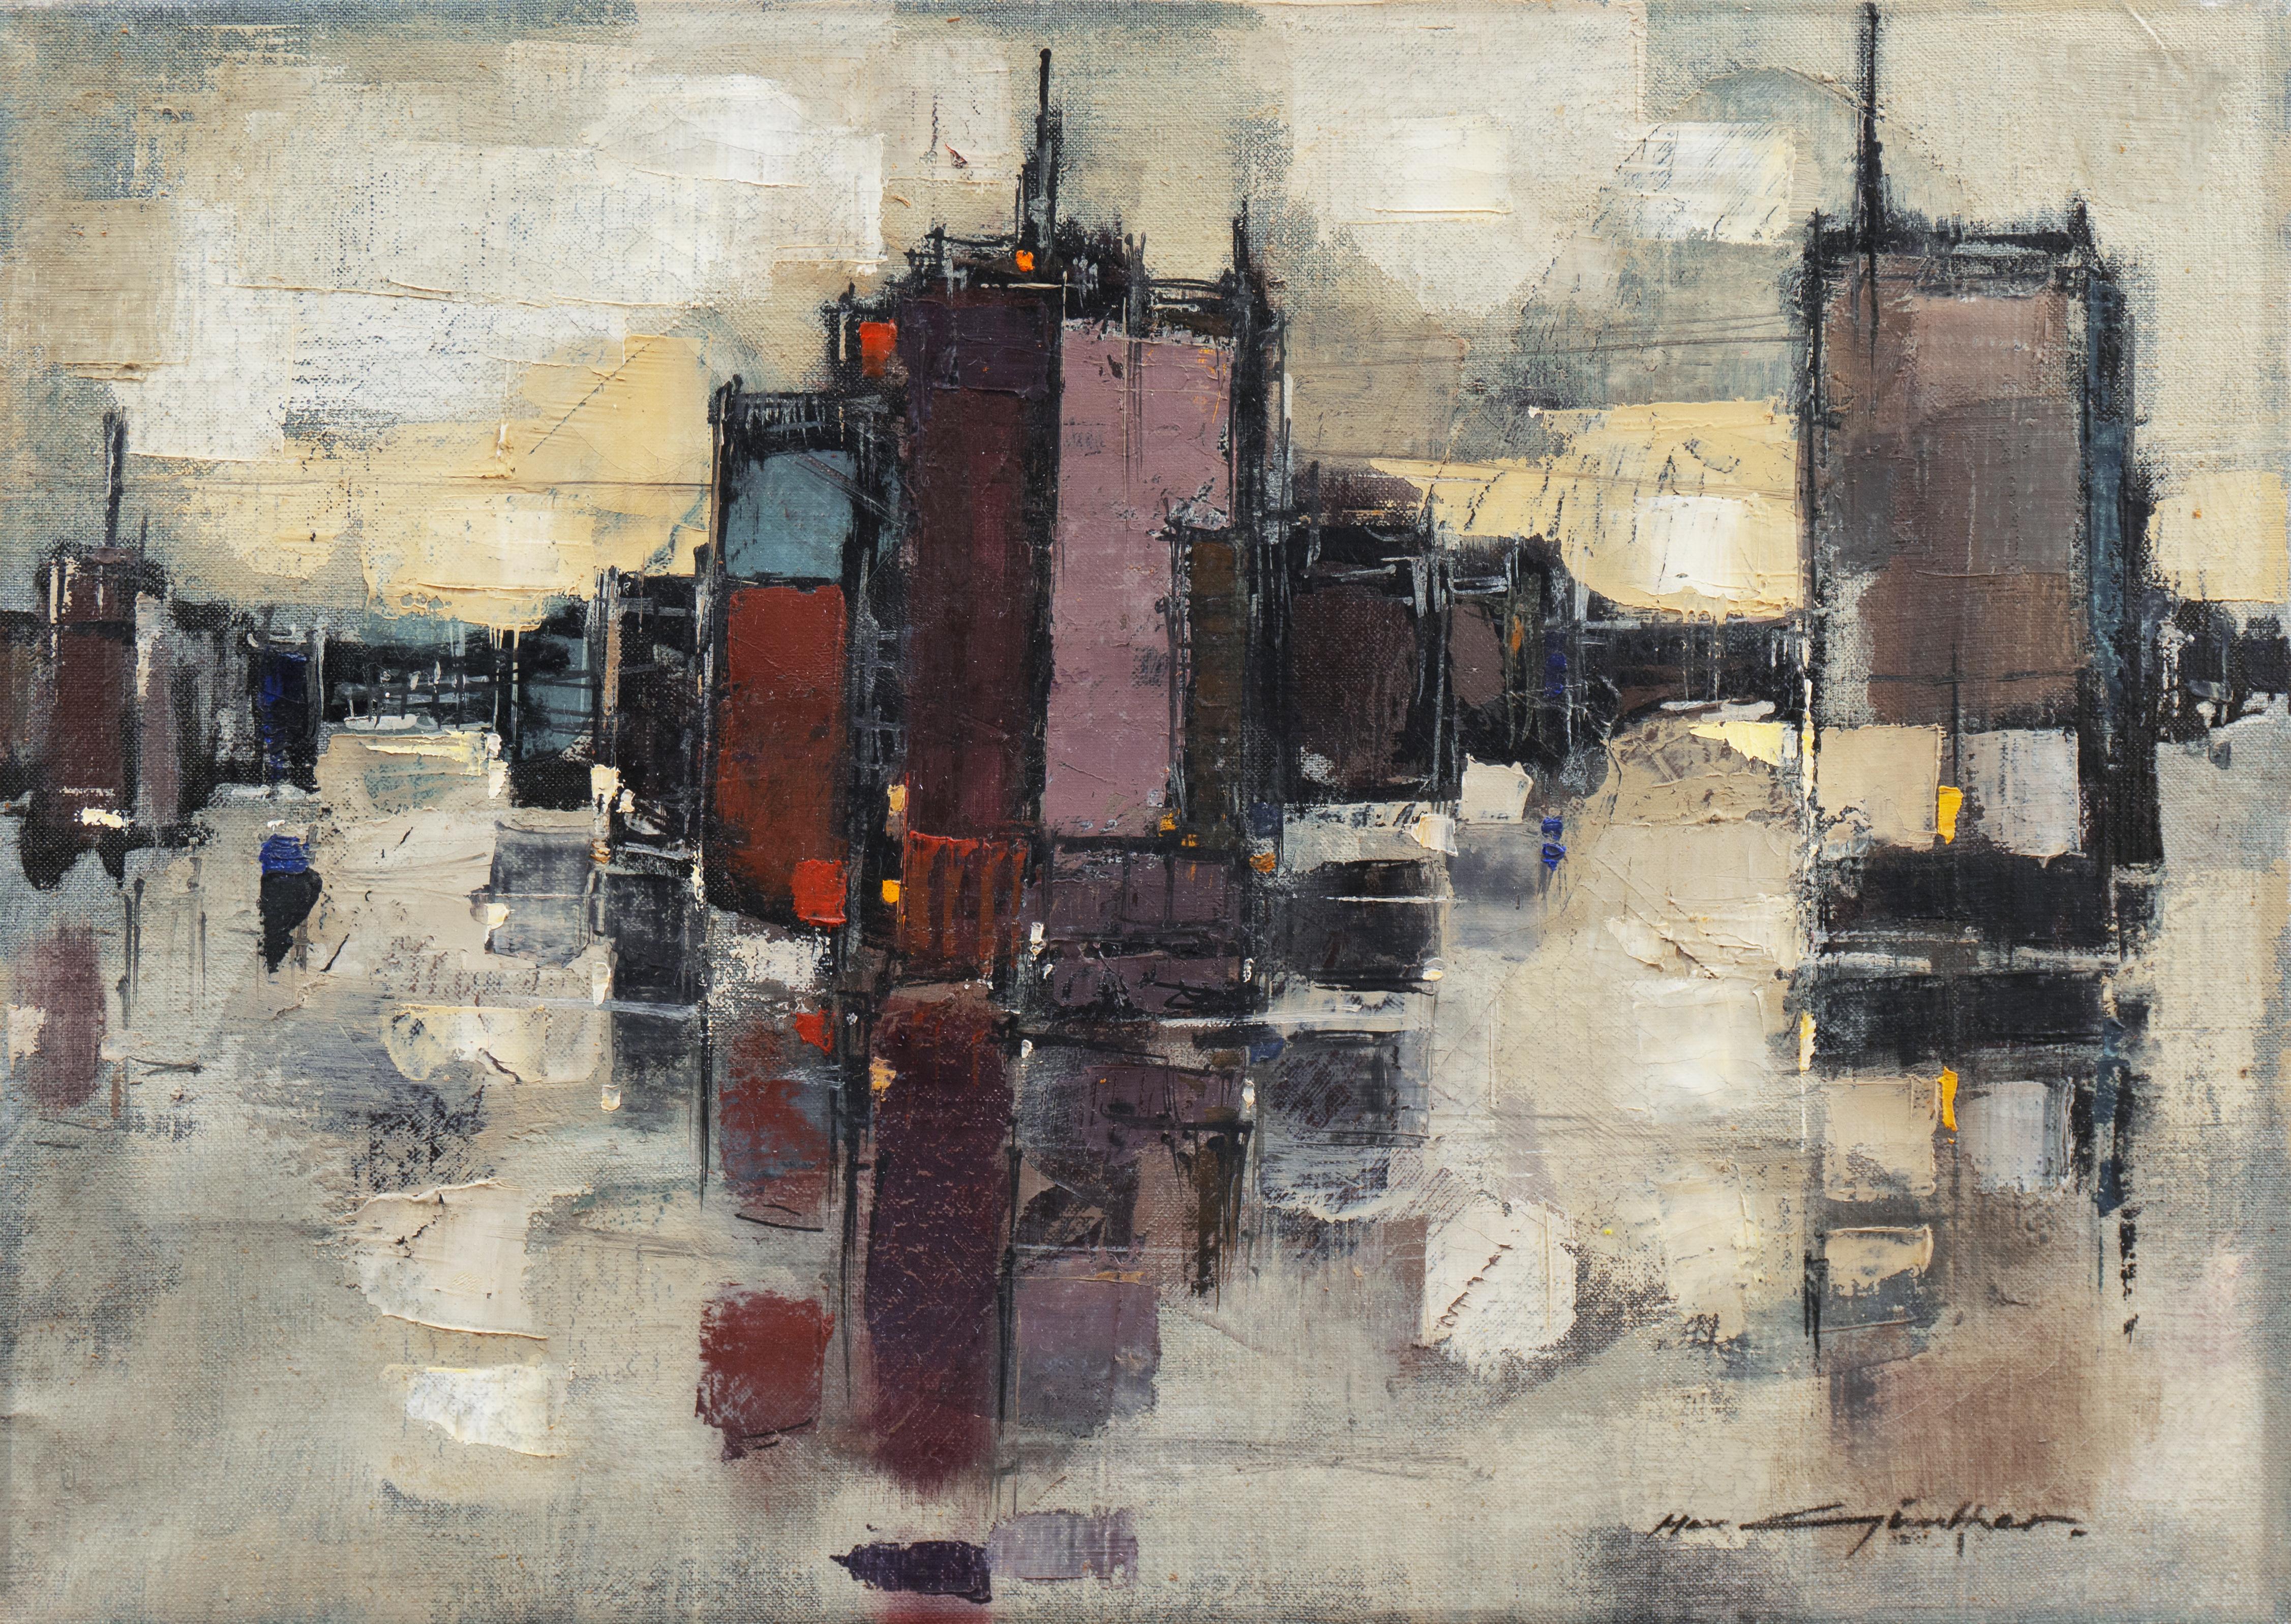 Max Gunther Landscape Painting - 'Abstracted Cityscape', Modernist Abstract Oil, David Rockefeller Estate